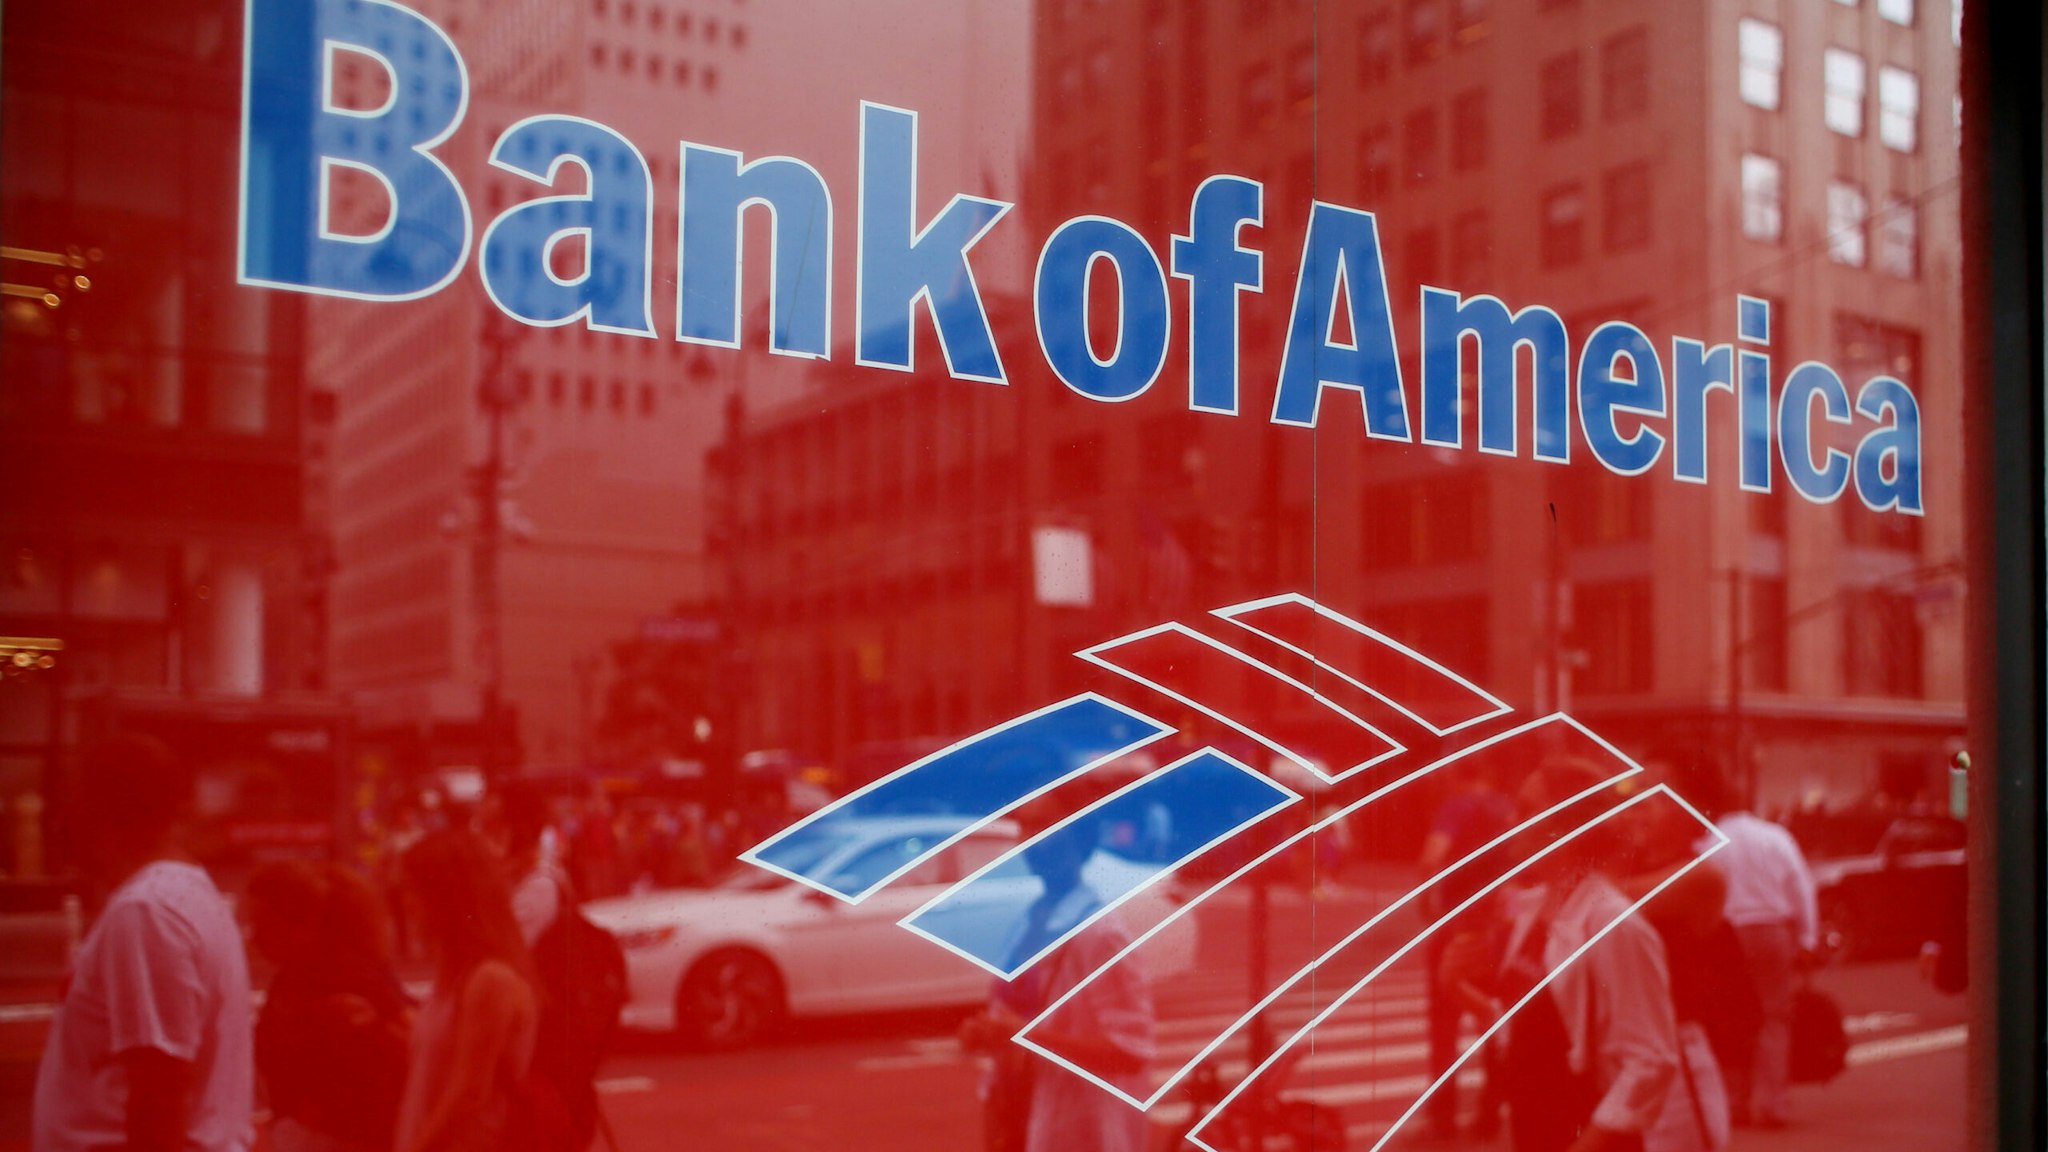 Bank of America is being criticized for a new minority lending program some say discriminates against white homebuyers.